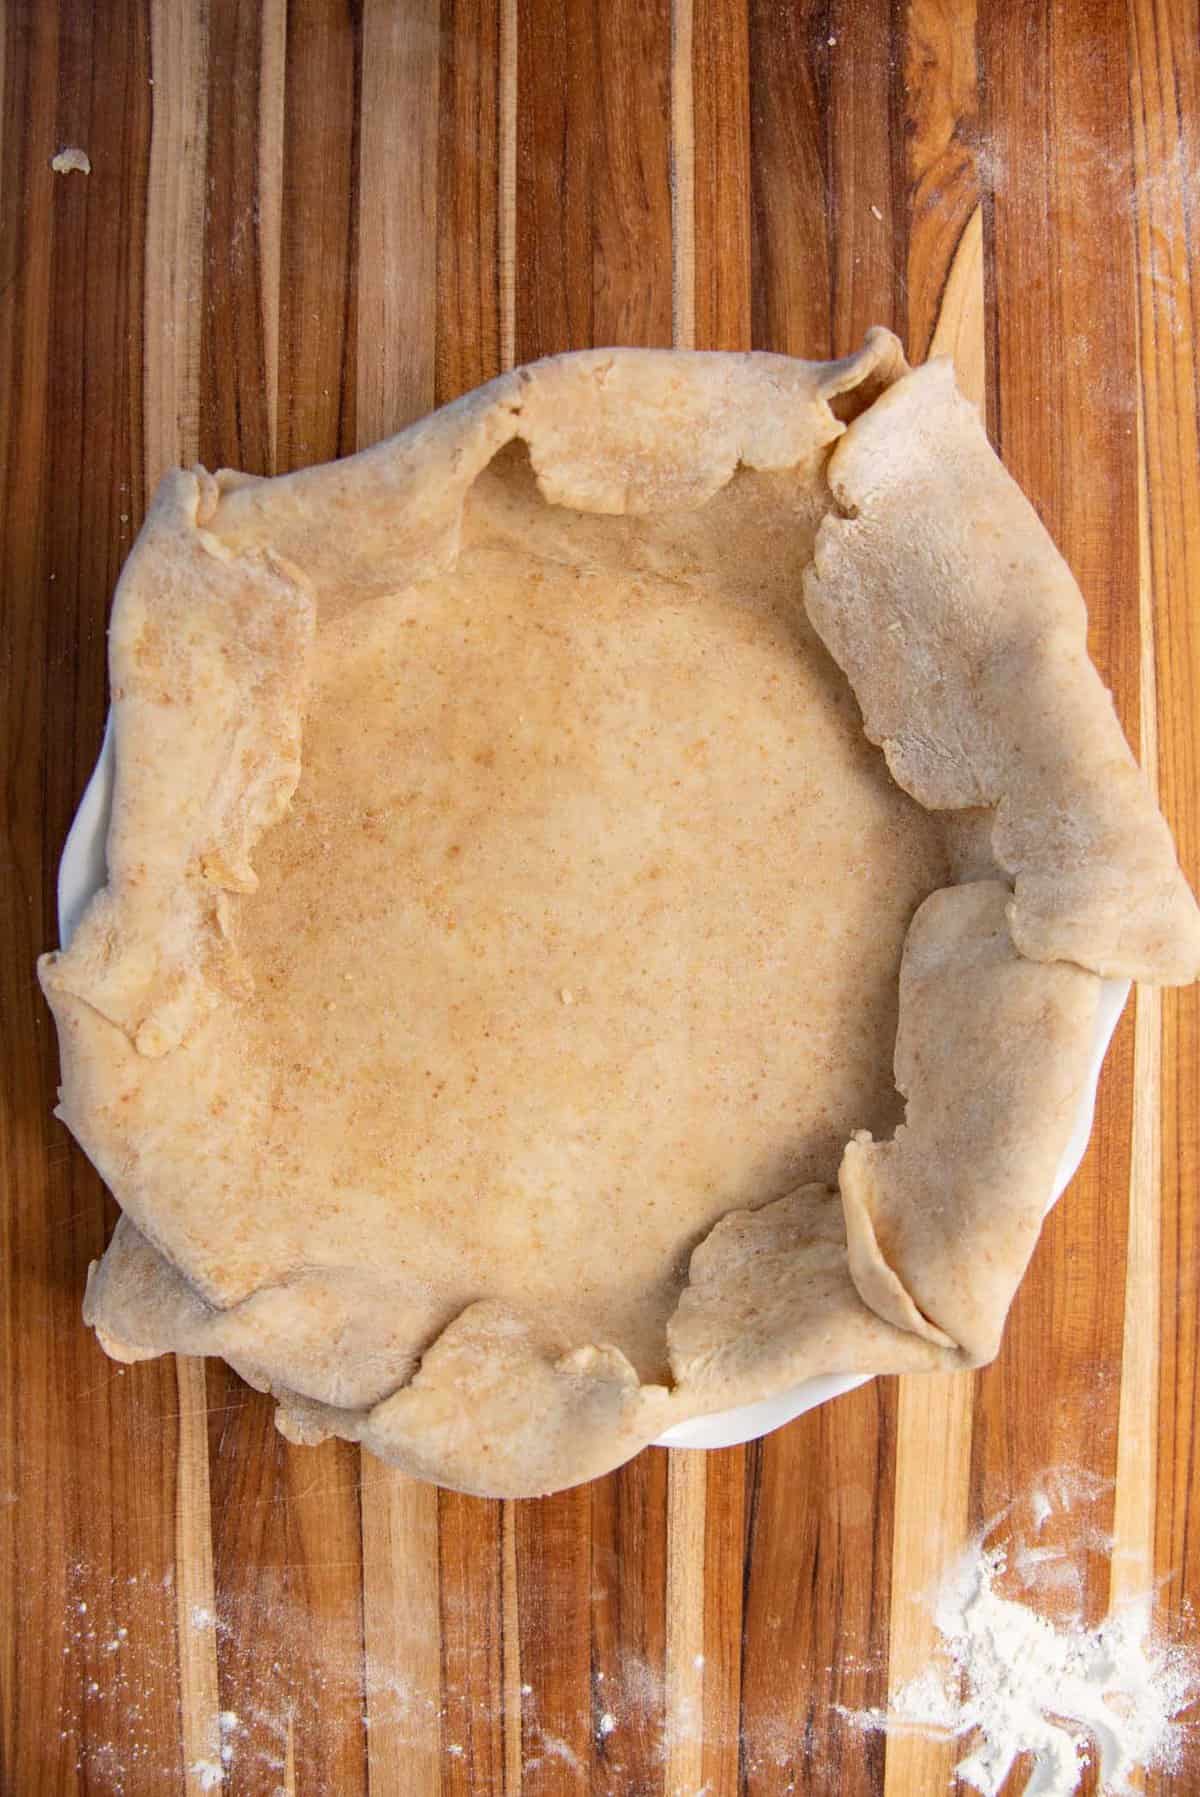 The rolled out pie dough in a pie dish.